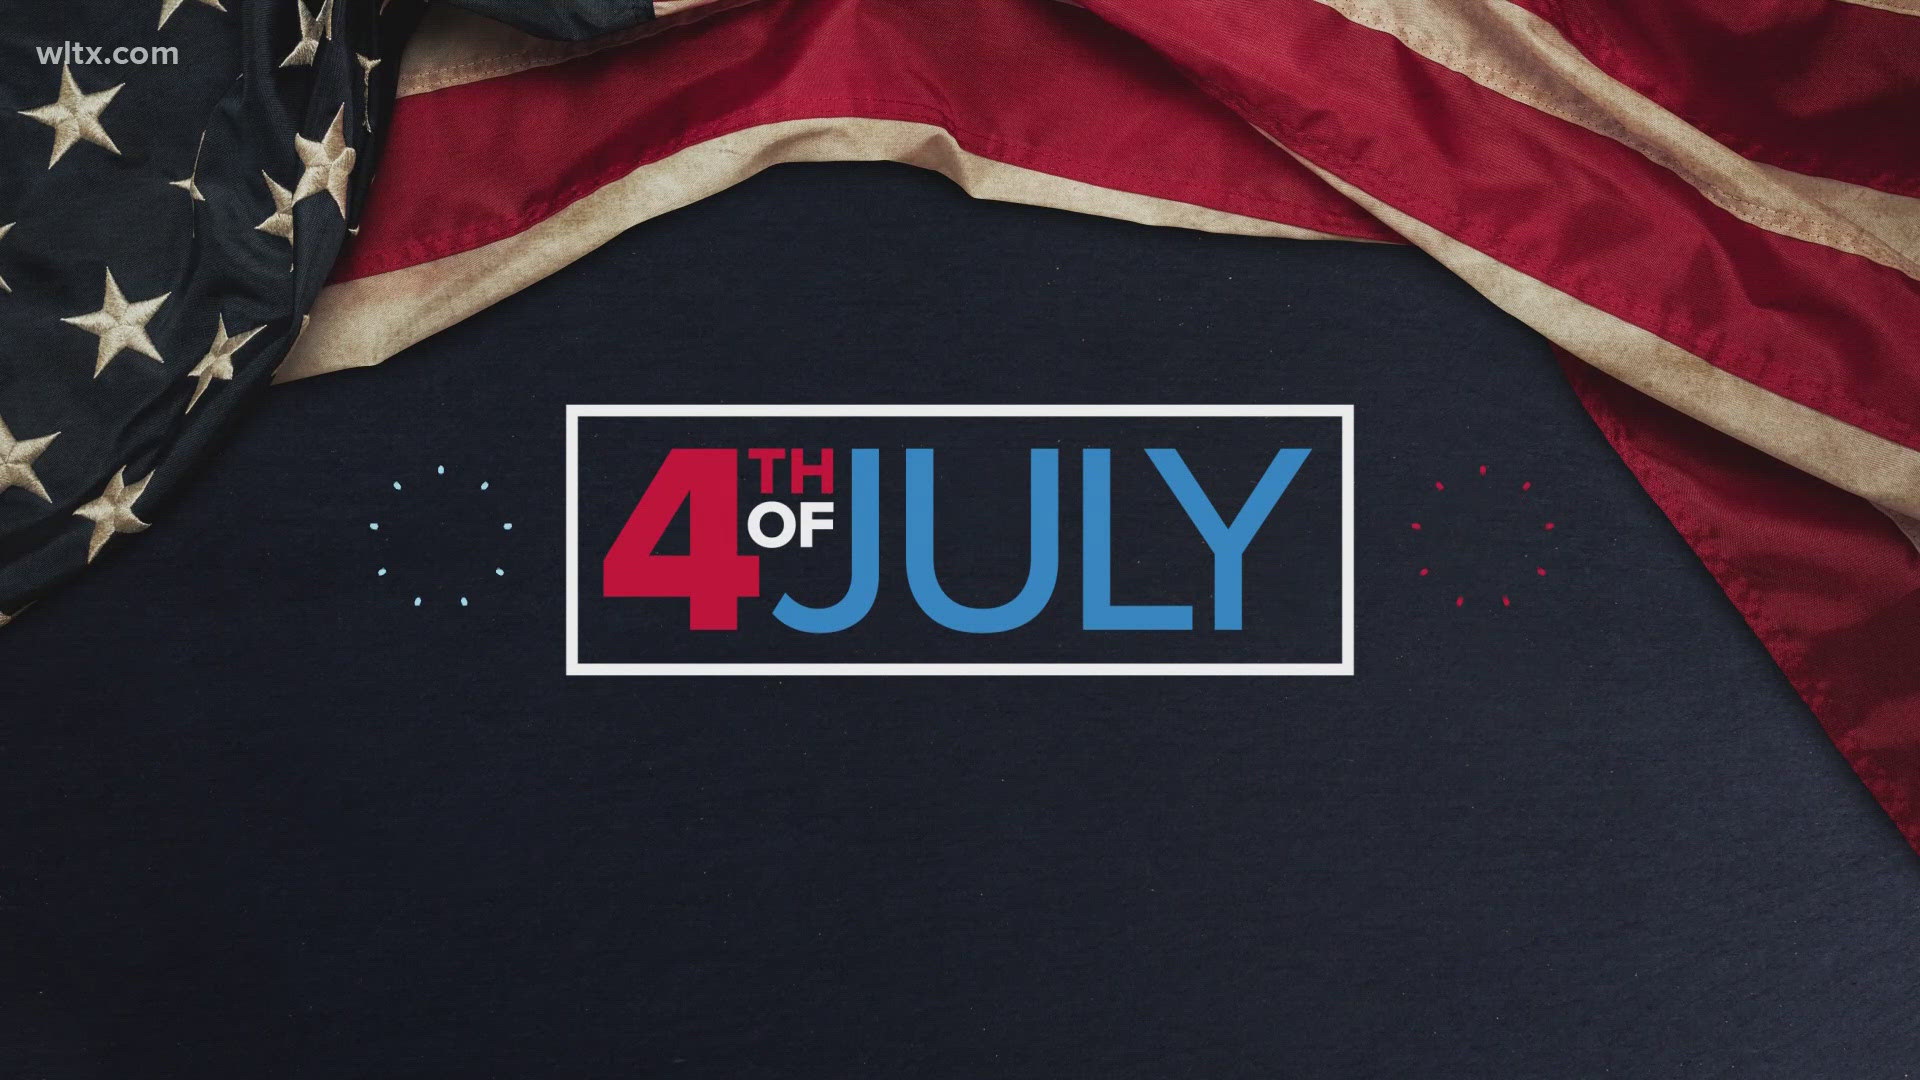 News19's Whitney Sullivan and Christy Calcagno hit the streets of Columbia to test people's knowledge about the 4th of July.